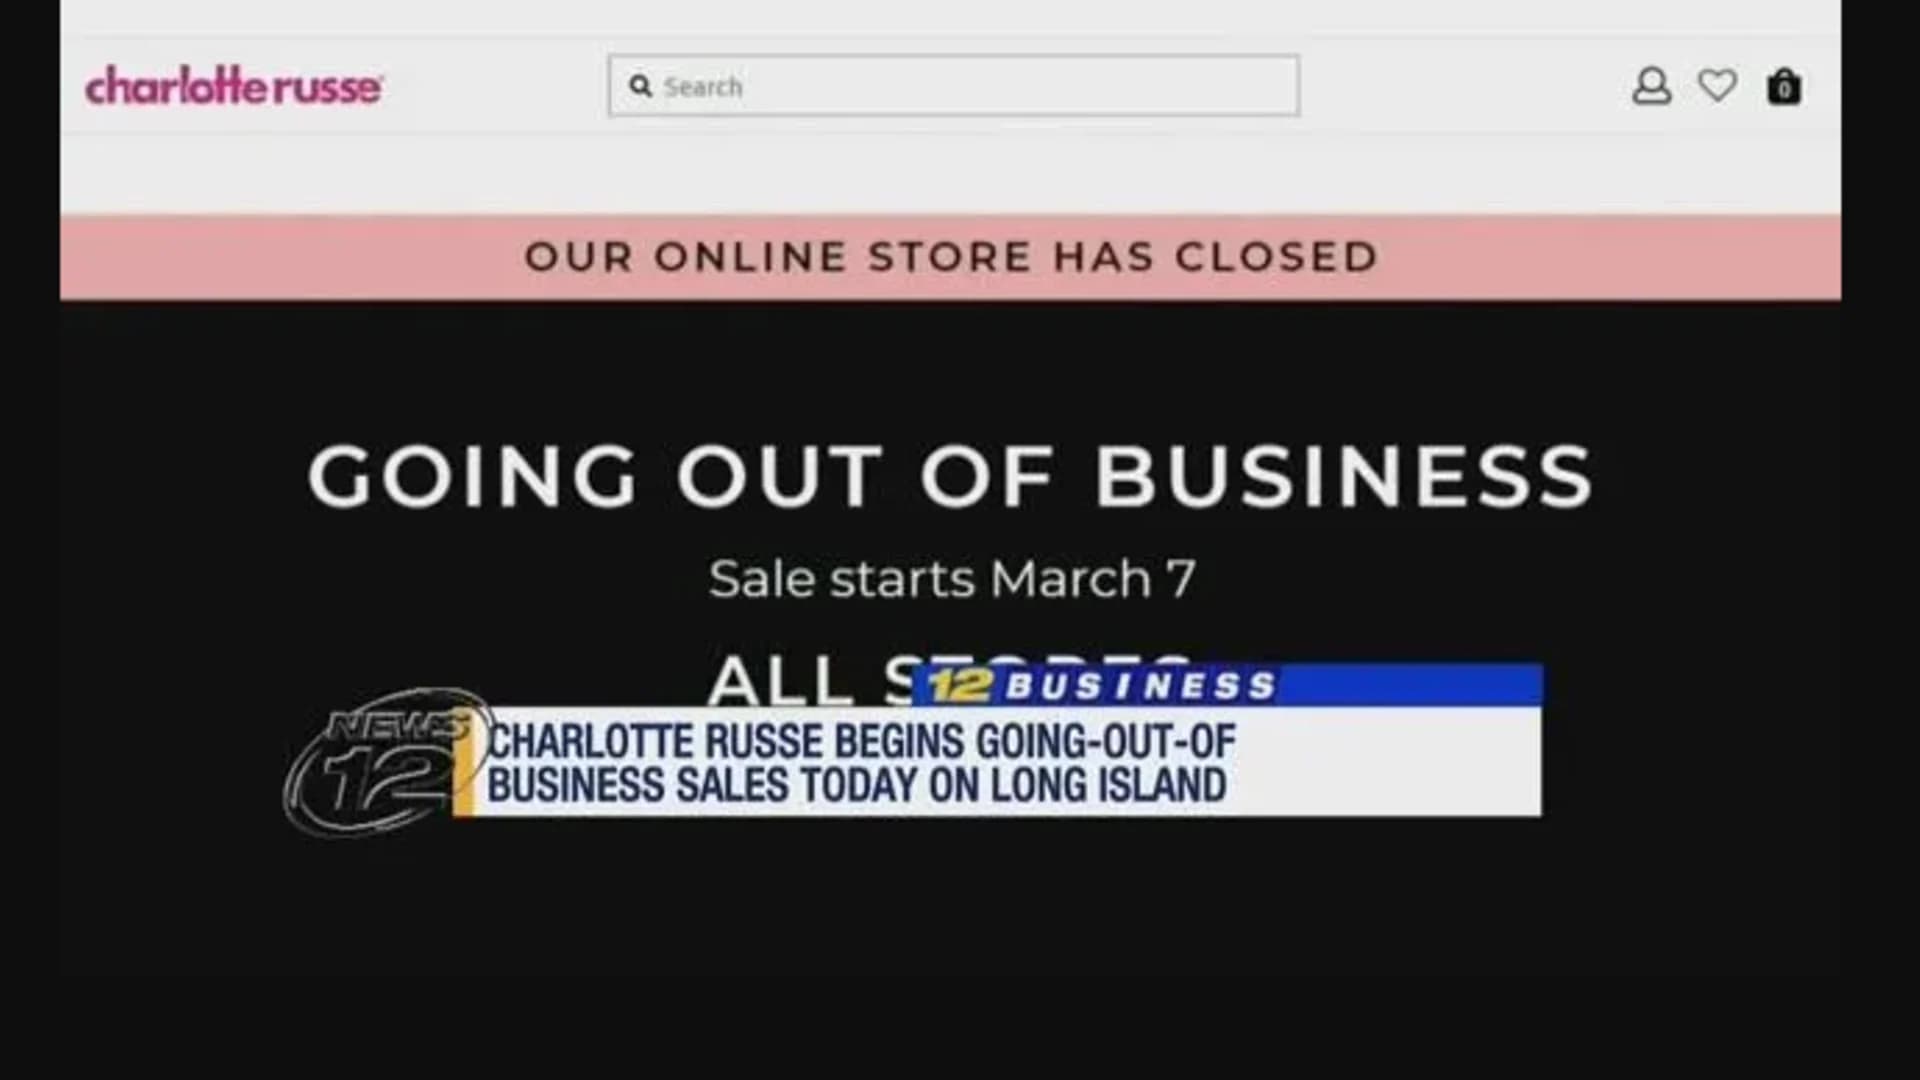 7 Charlotte Russe stores going out of business on Long Island